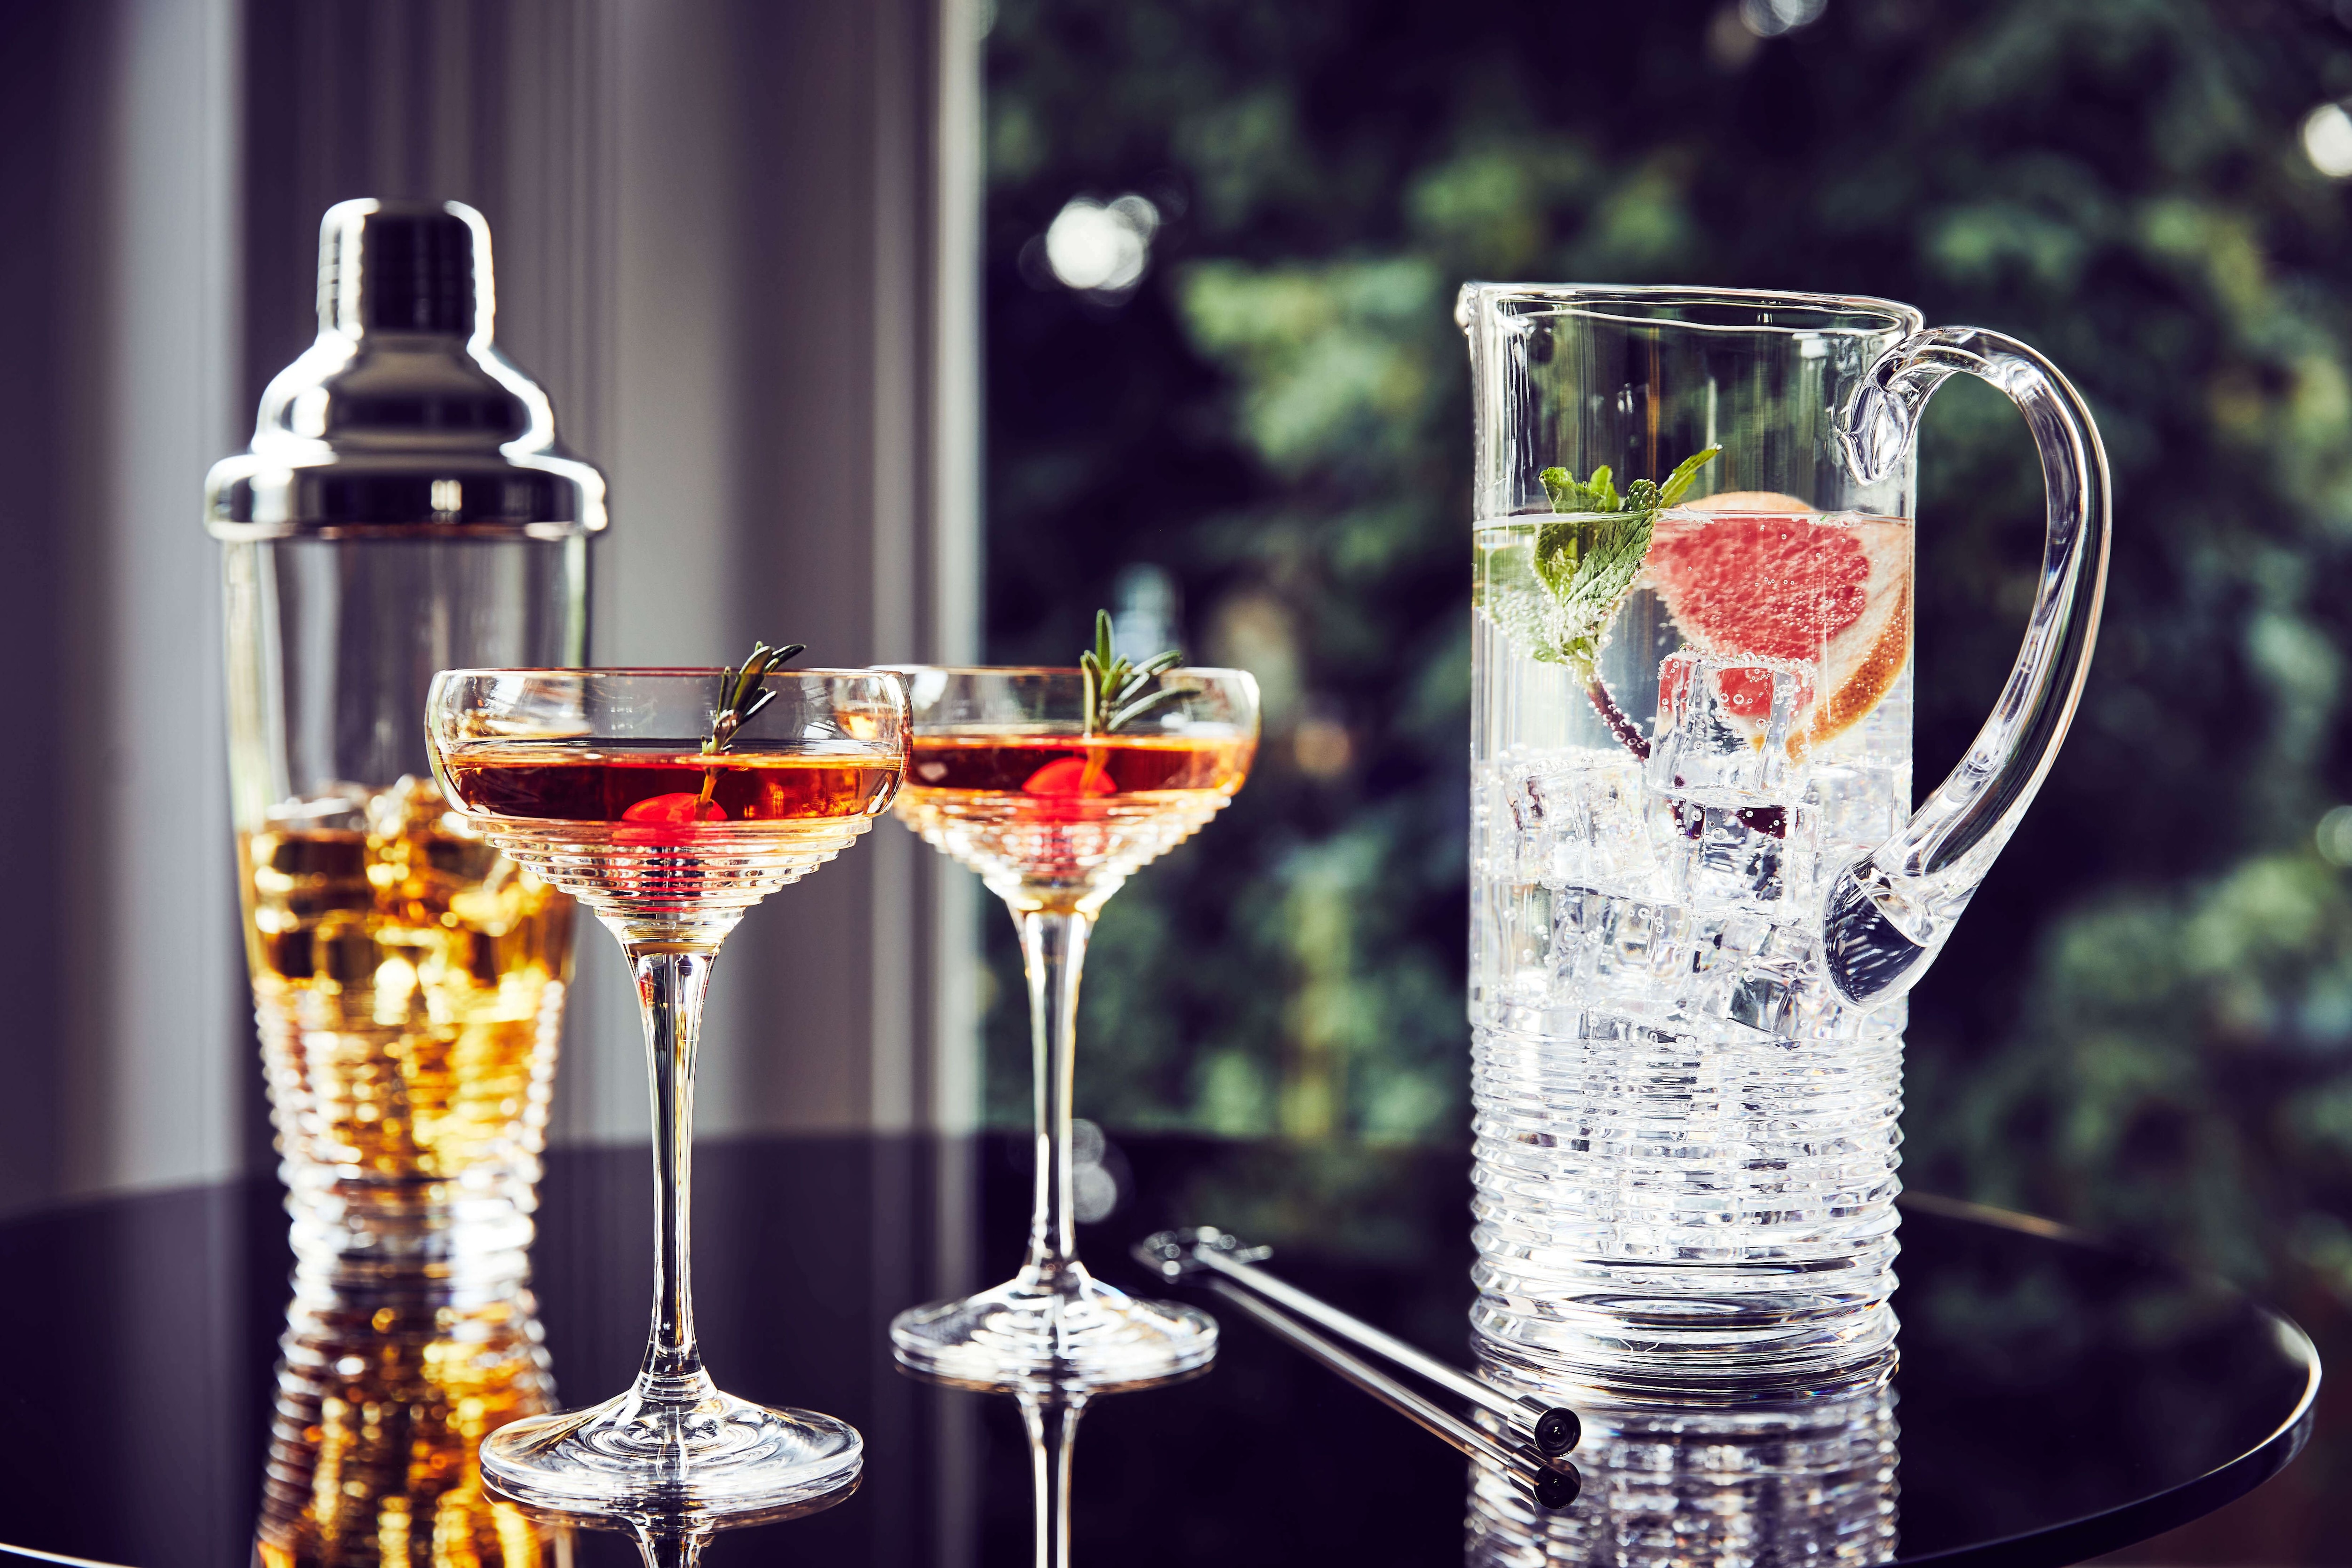 https://www.waterford.com/-/media/waterford/images/editorials/inspiration/champagne-glass-guide/waterford_mixology_lifestyle_2021_01.jpg